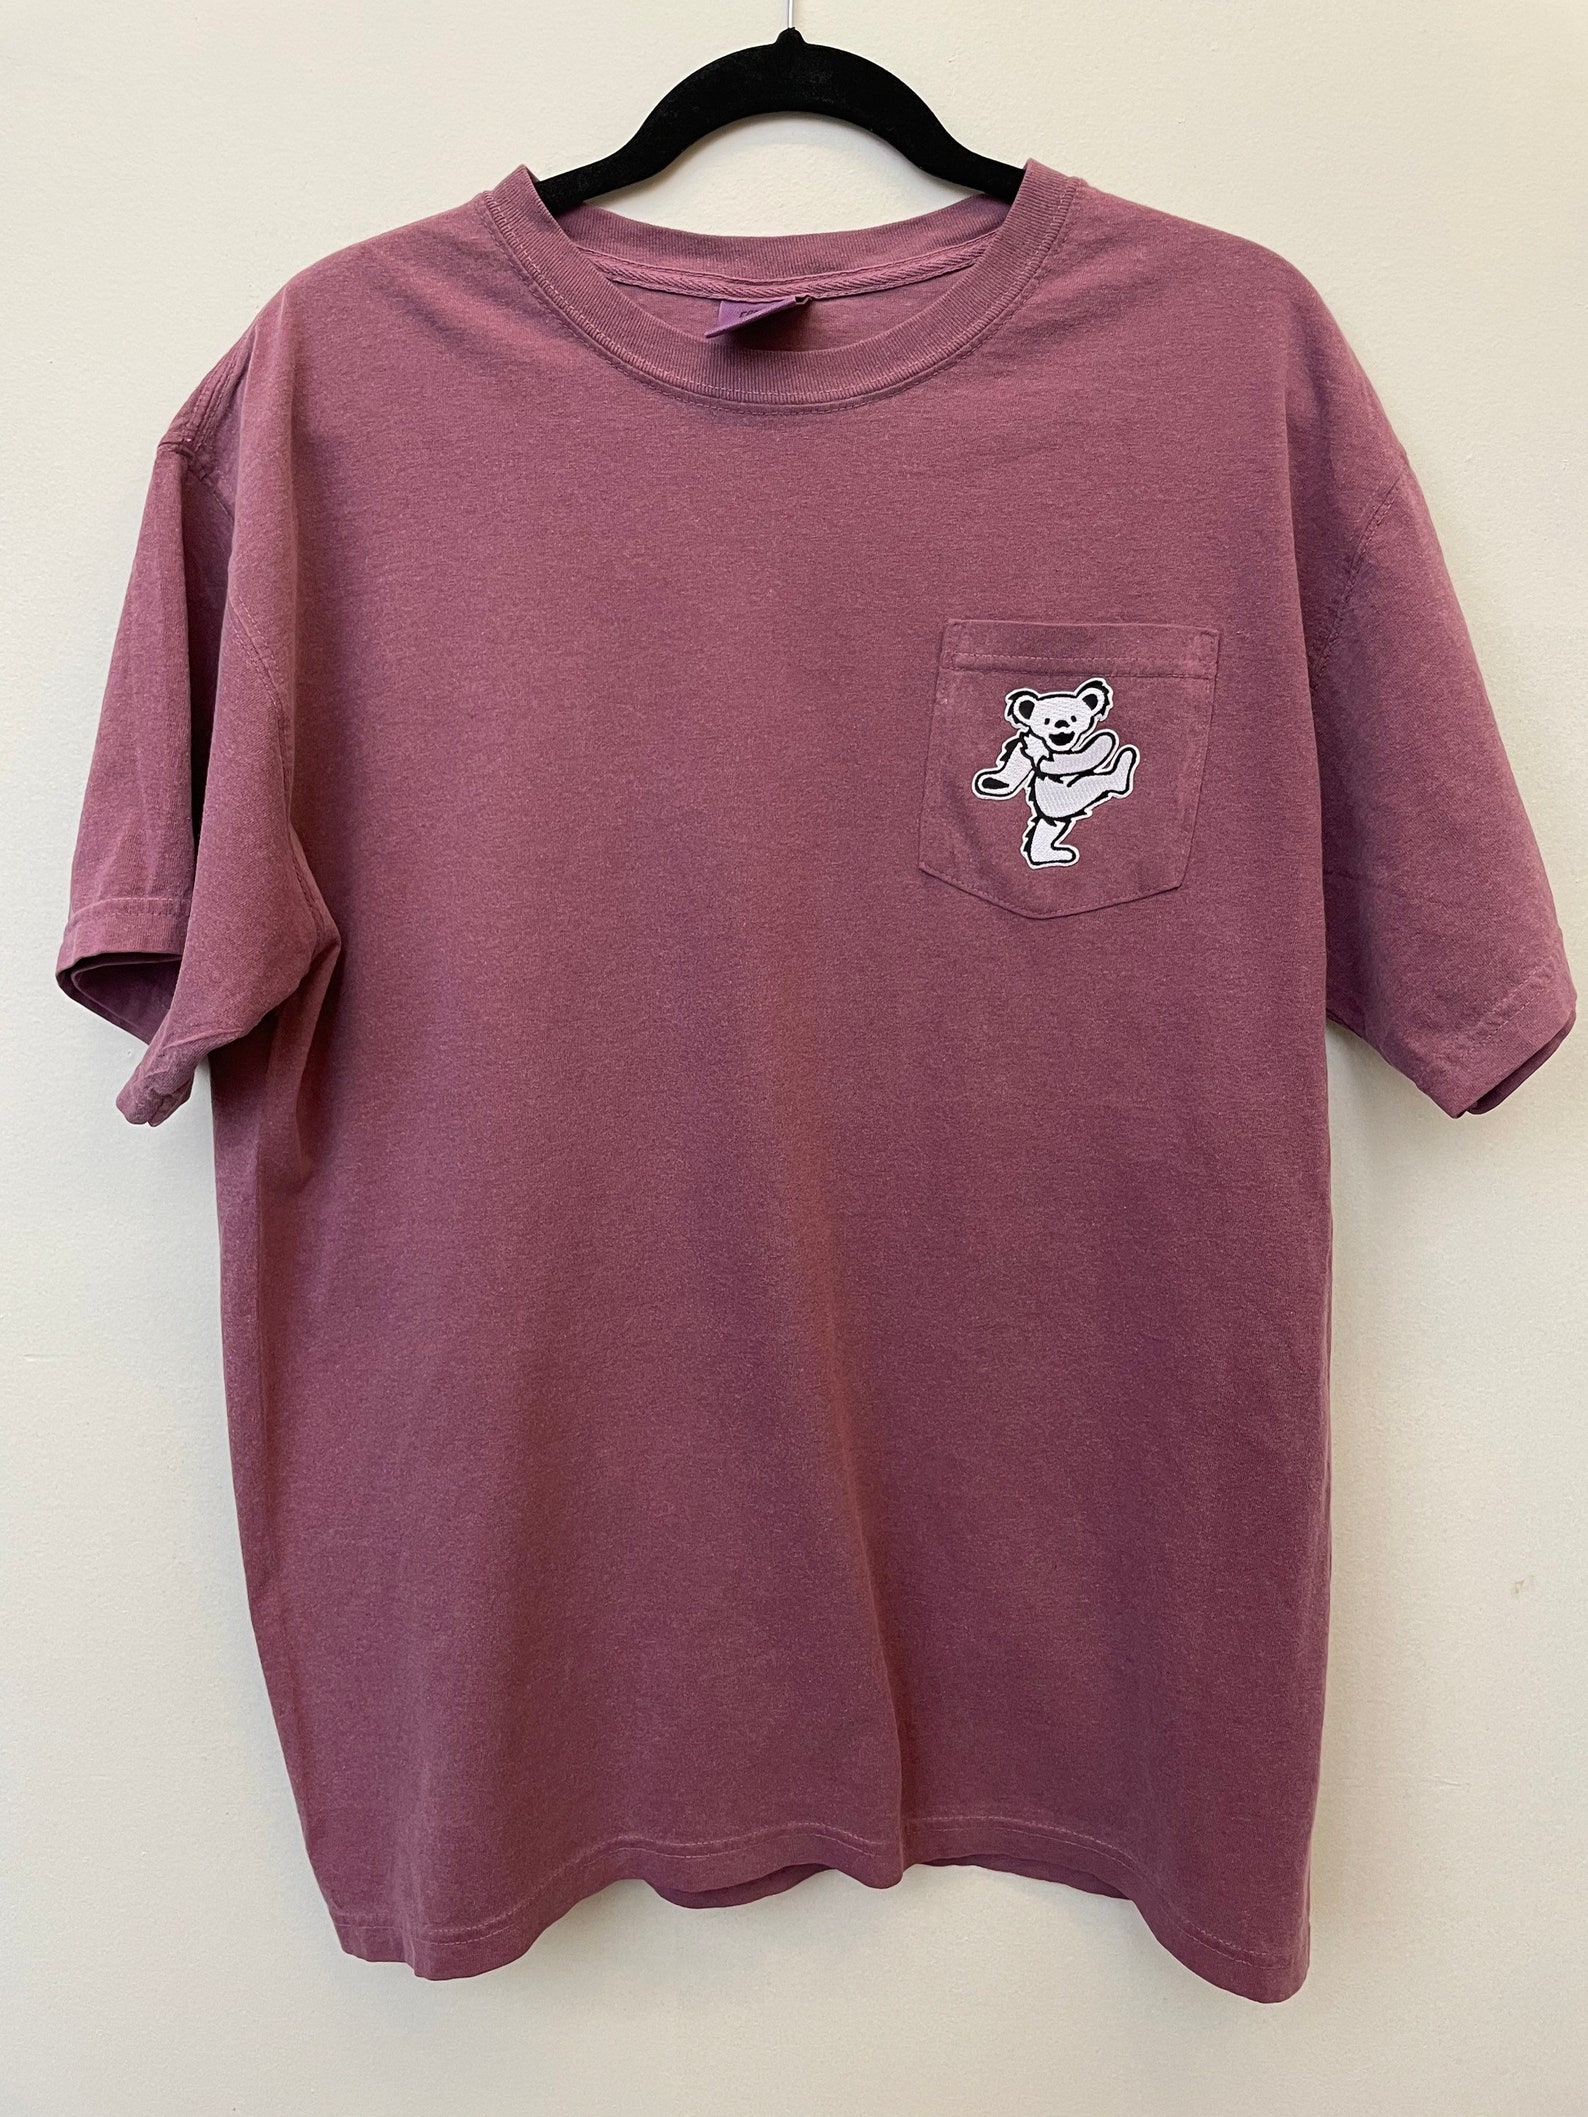 Berry Comfort Colors Pocket Tee w White Bear Patch 100% Cotton | Etsy